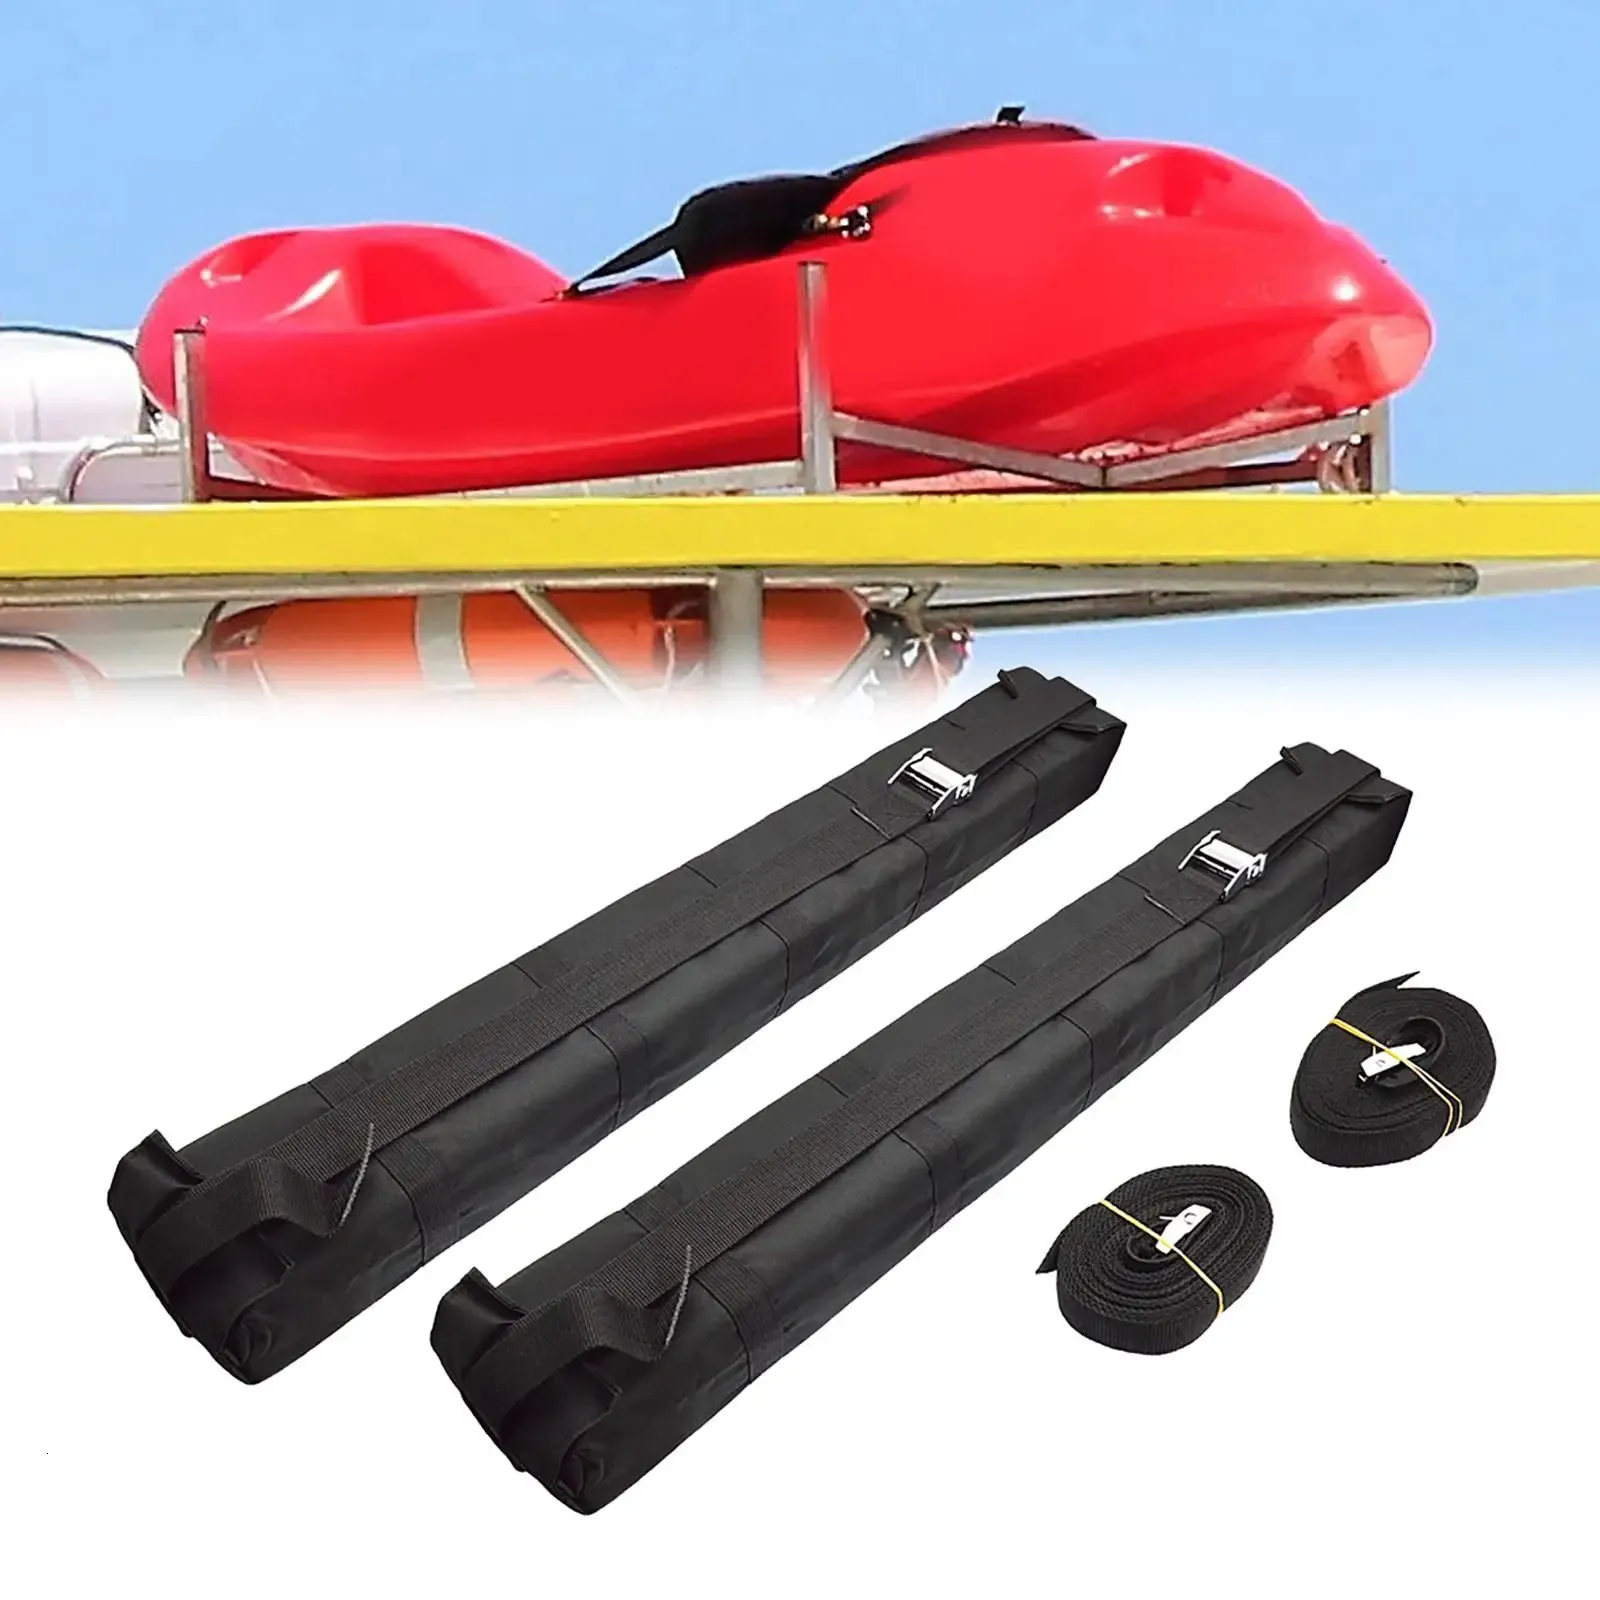 Kayak Roof Rack Pads Universal Car Soft Roof Rack with Tie Down Straps for Canoe Surfboard Paddleboard Snowboard Water Sports 240428